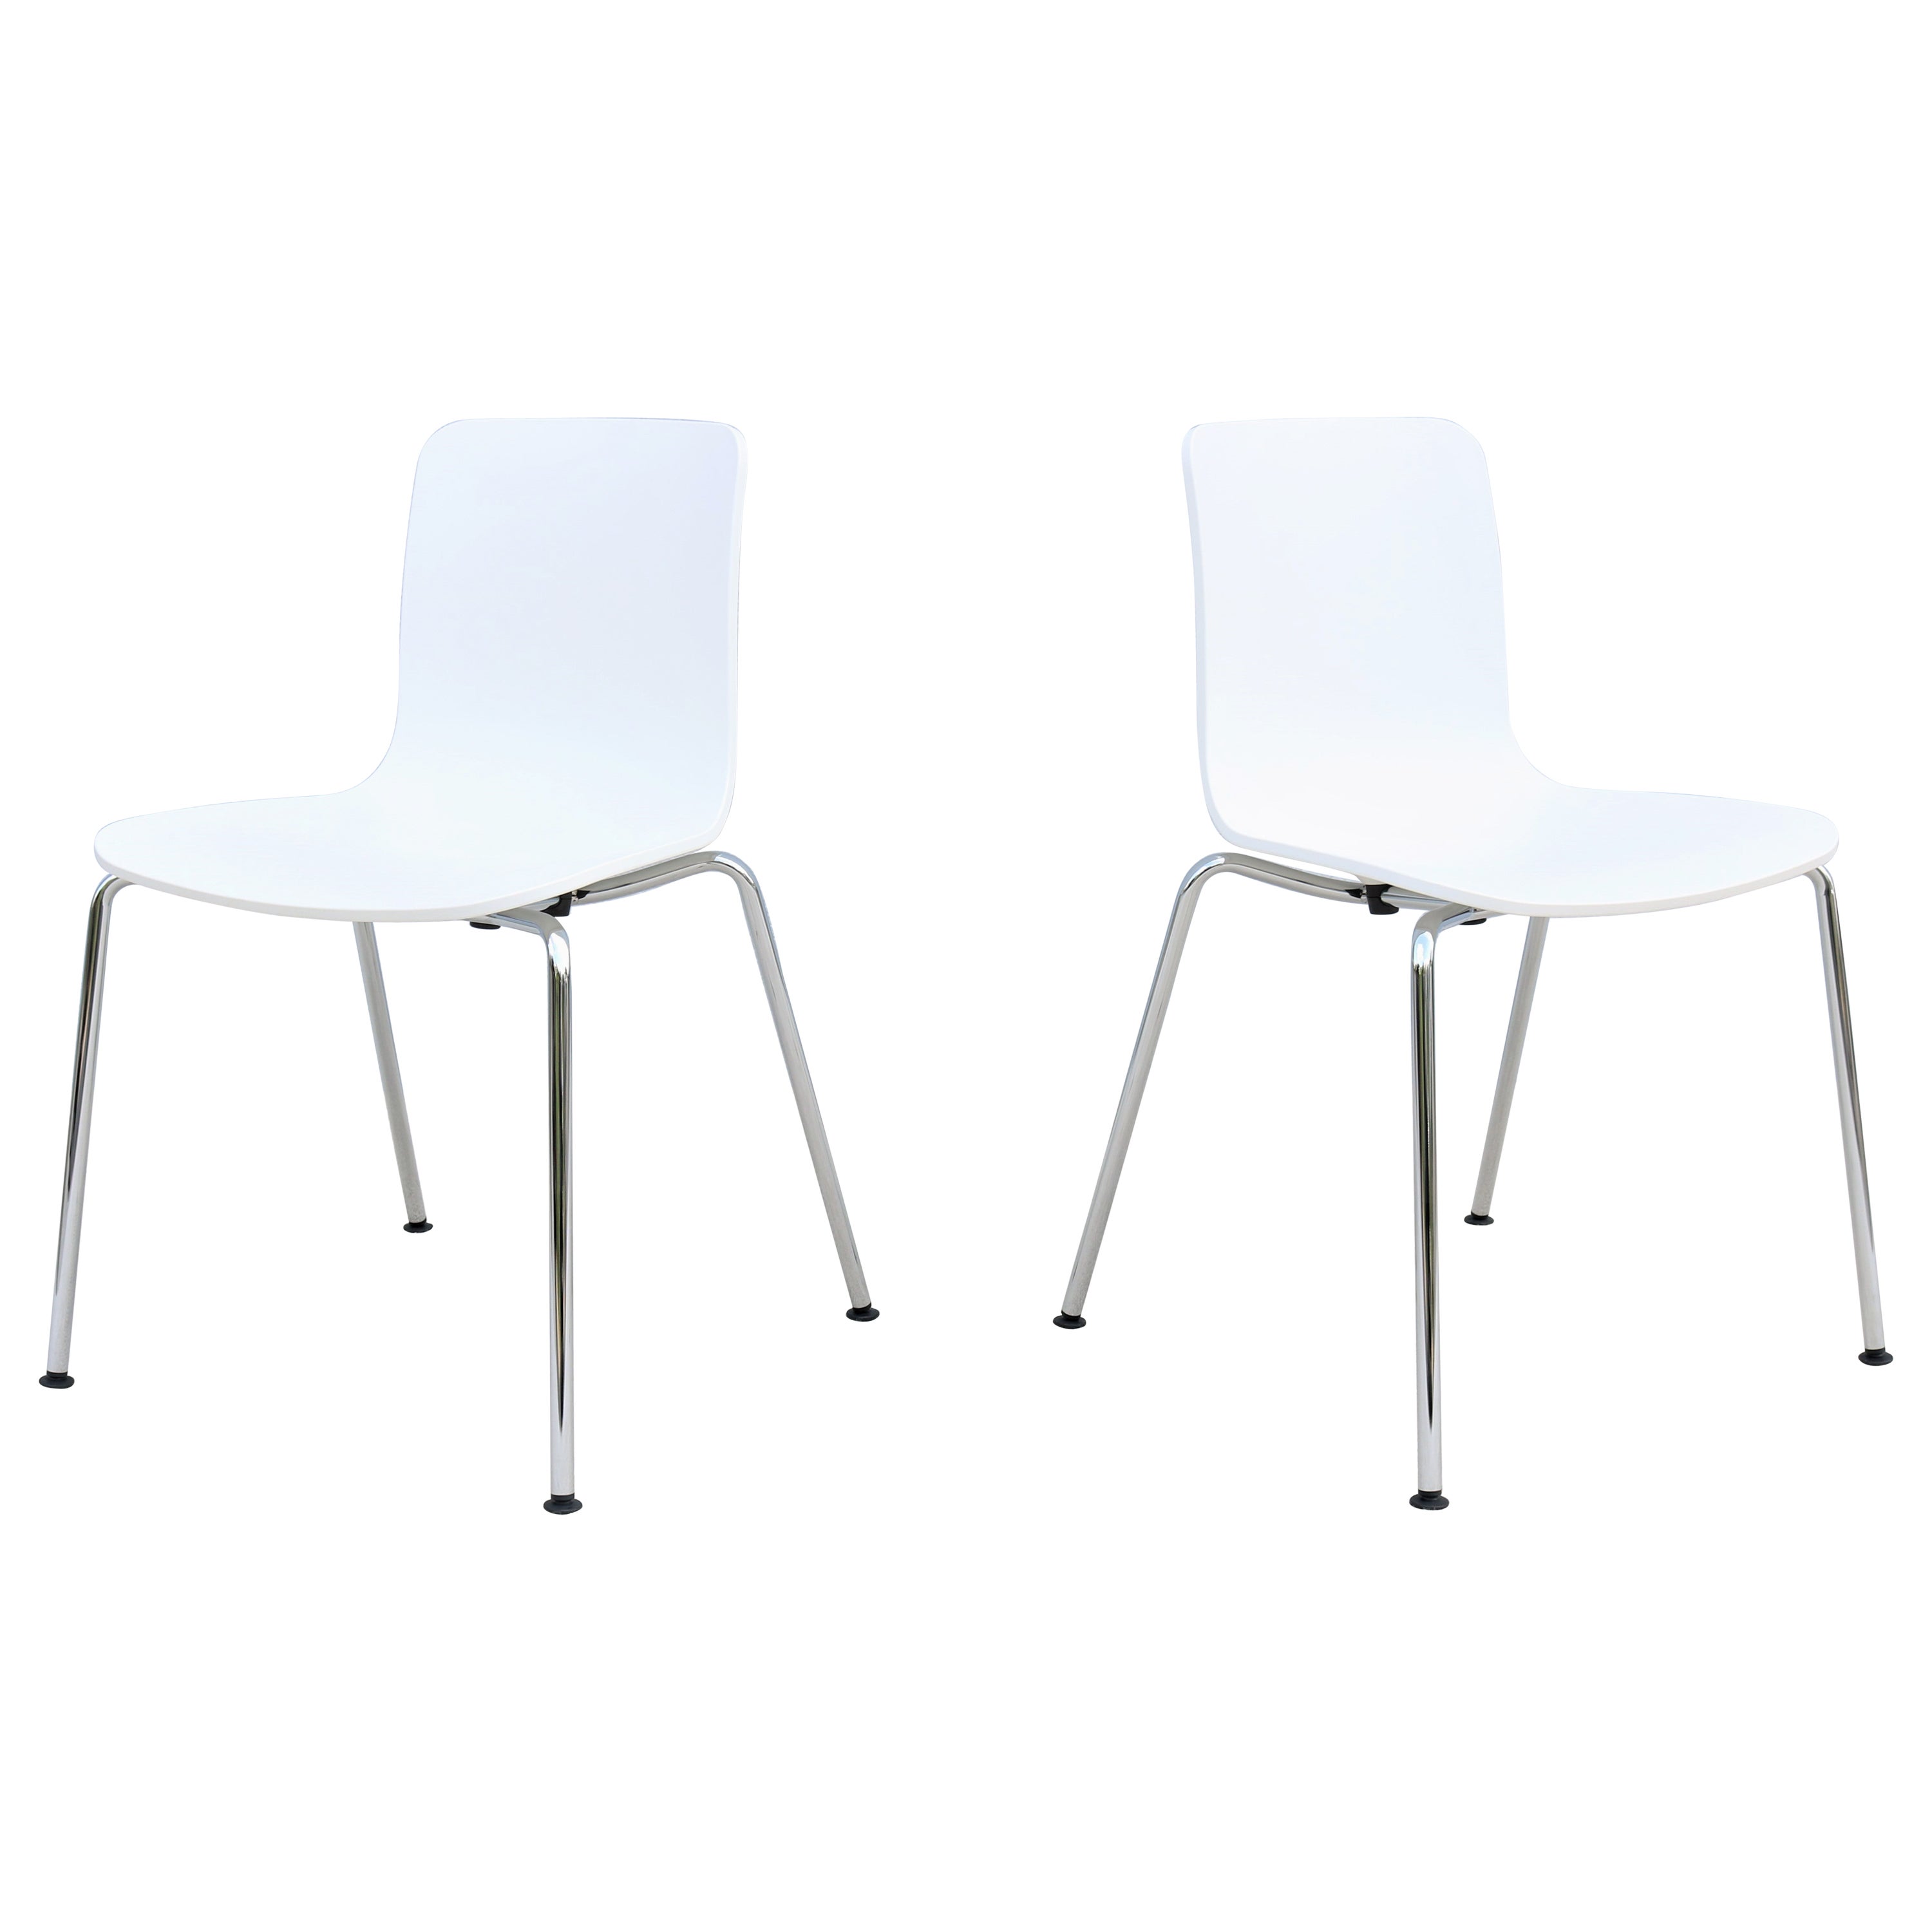 Modern Italy Jasper Morrison for Vitra HAL Tube Stackable Dining Chairs - a Pair For Sale